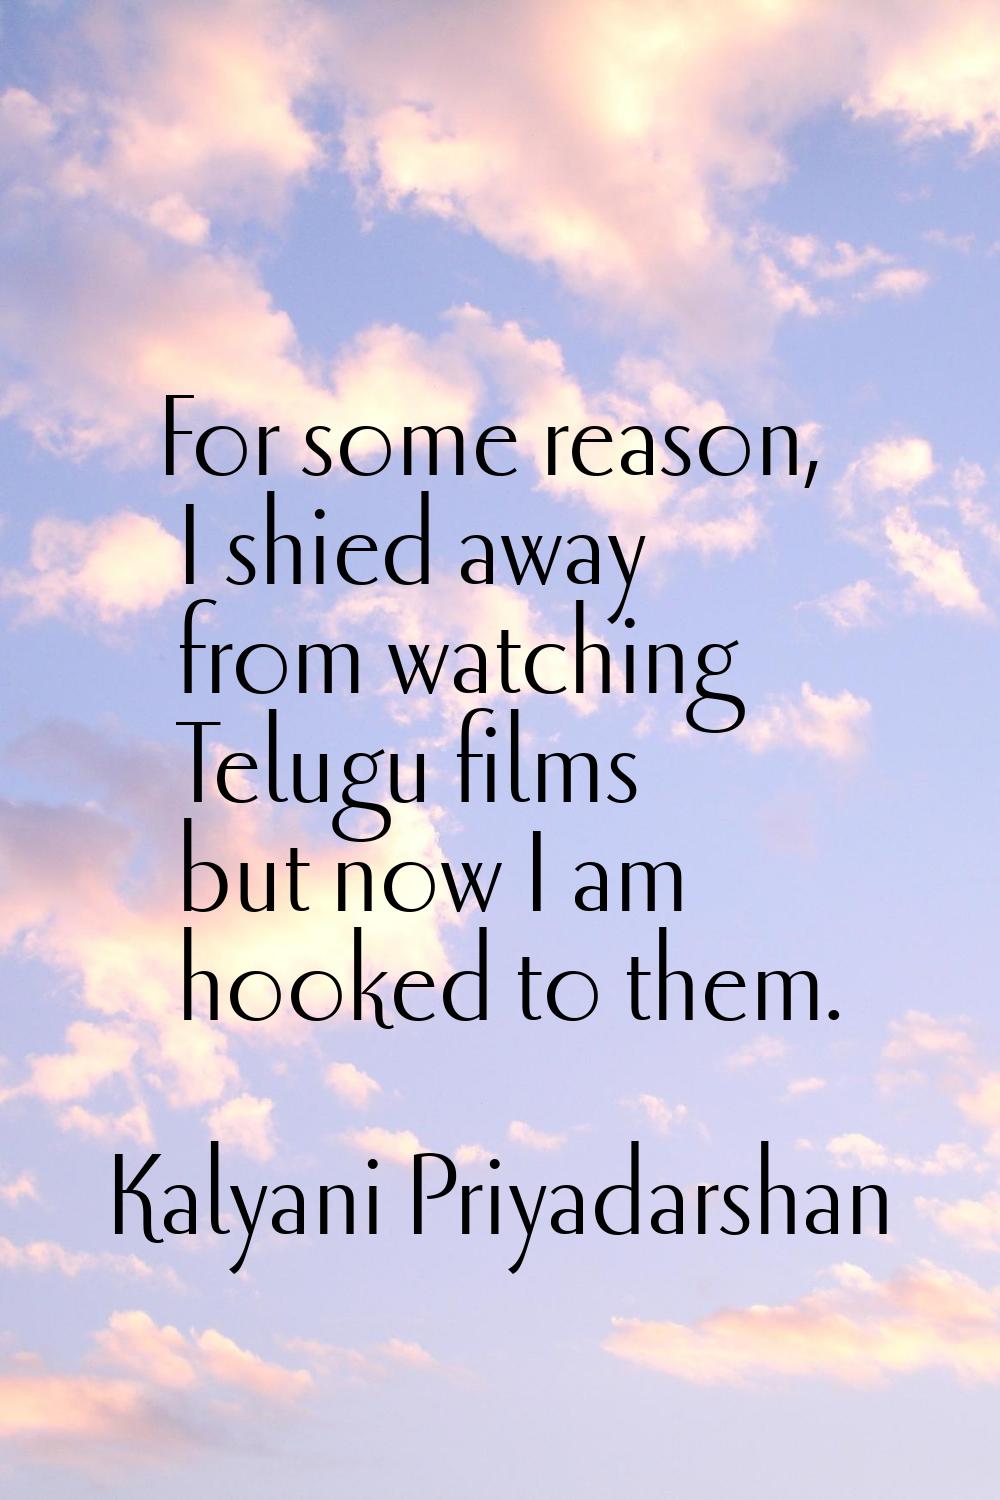 For some reason, I shied away from watching Telugu films but now I am hooked to them.